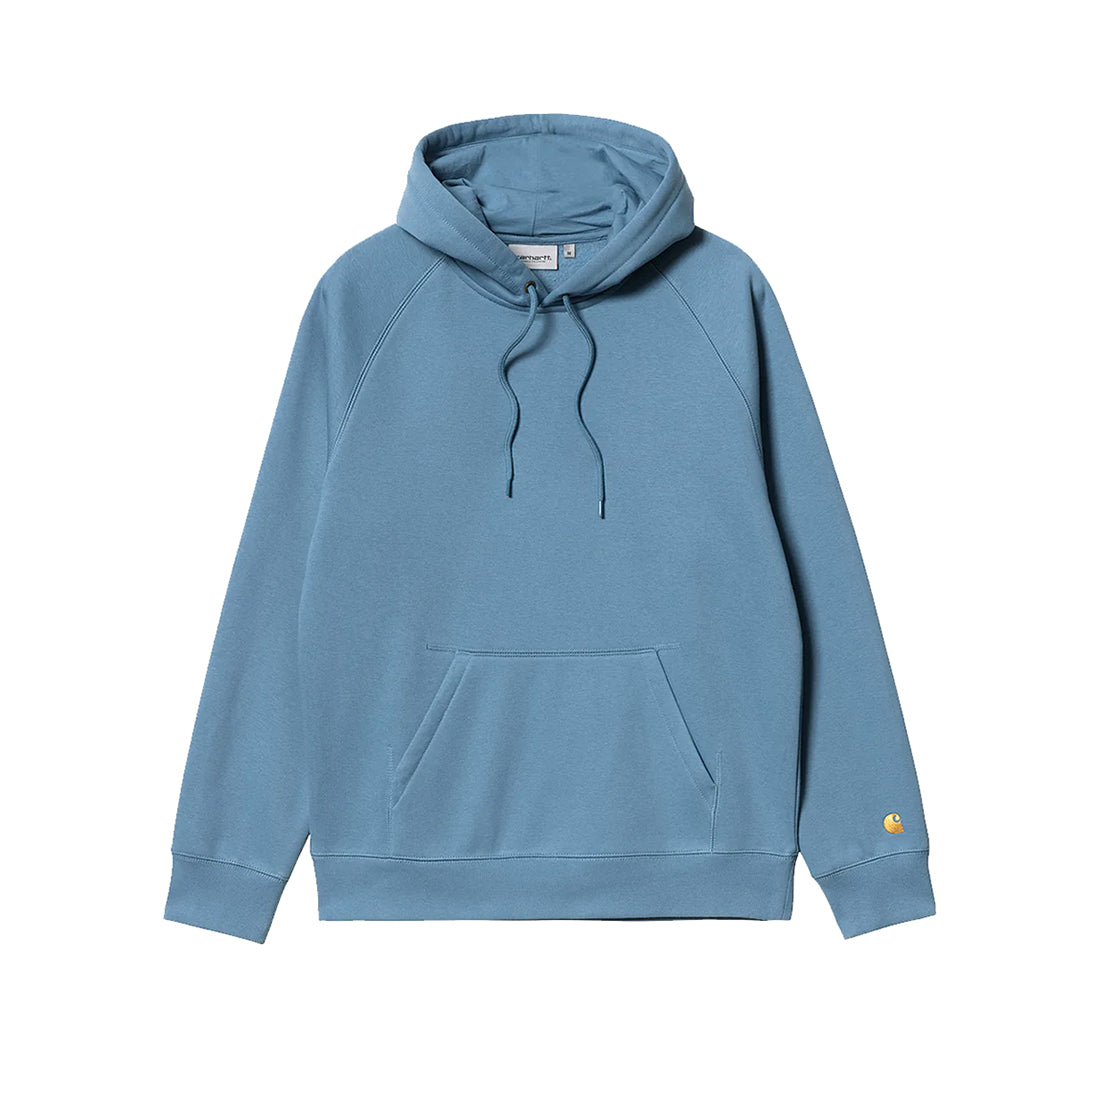 Hooded Chase Sweat - Blue/Gold